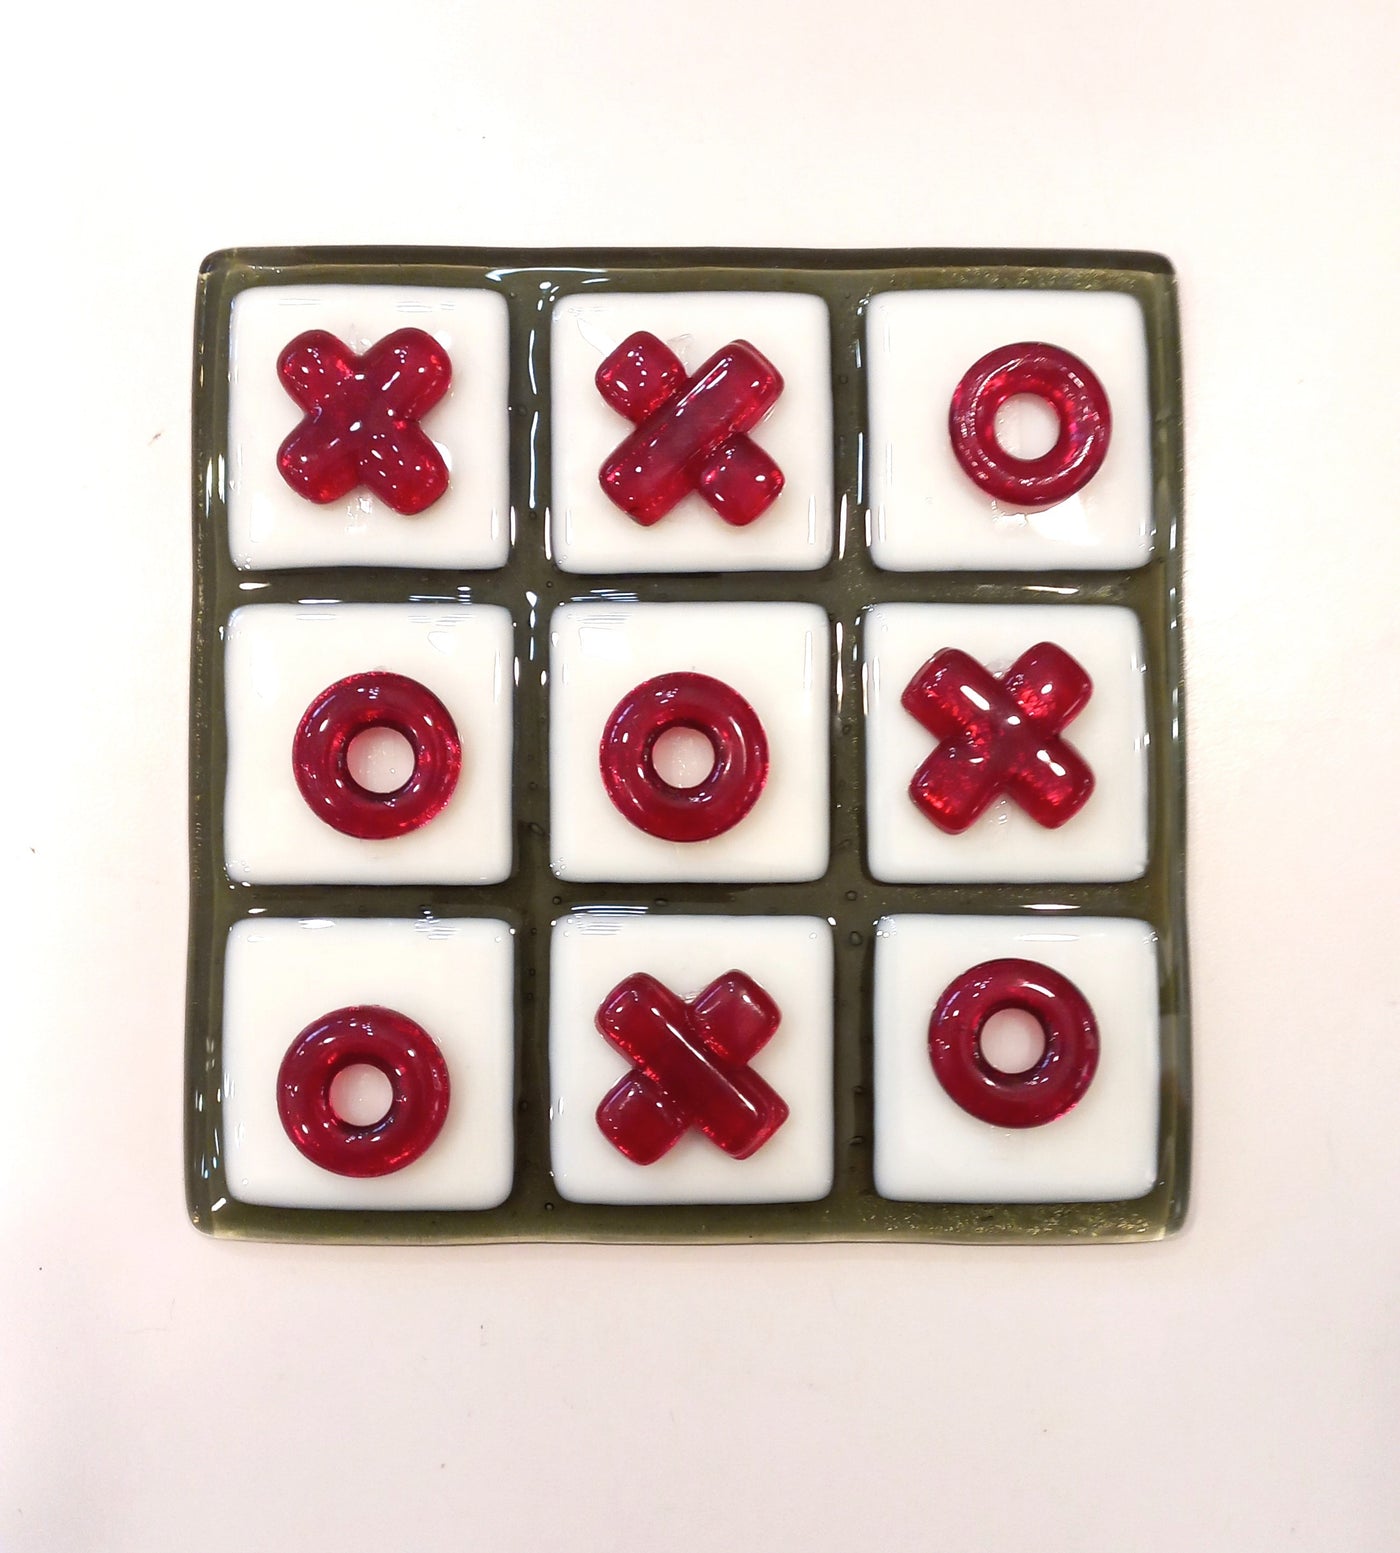 Tic Tac Toe by Laurie Moose